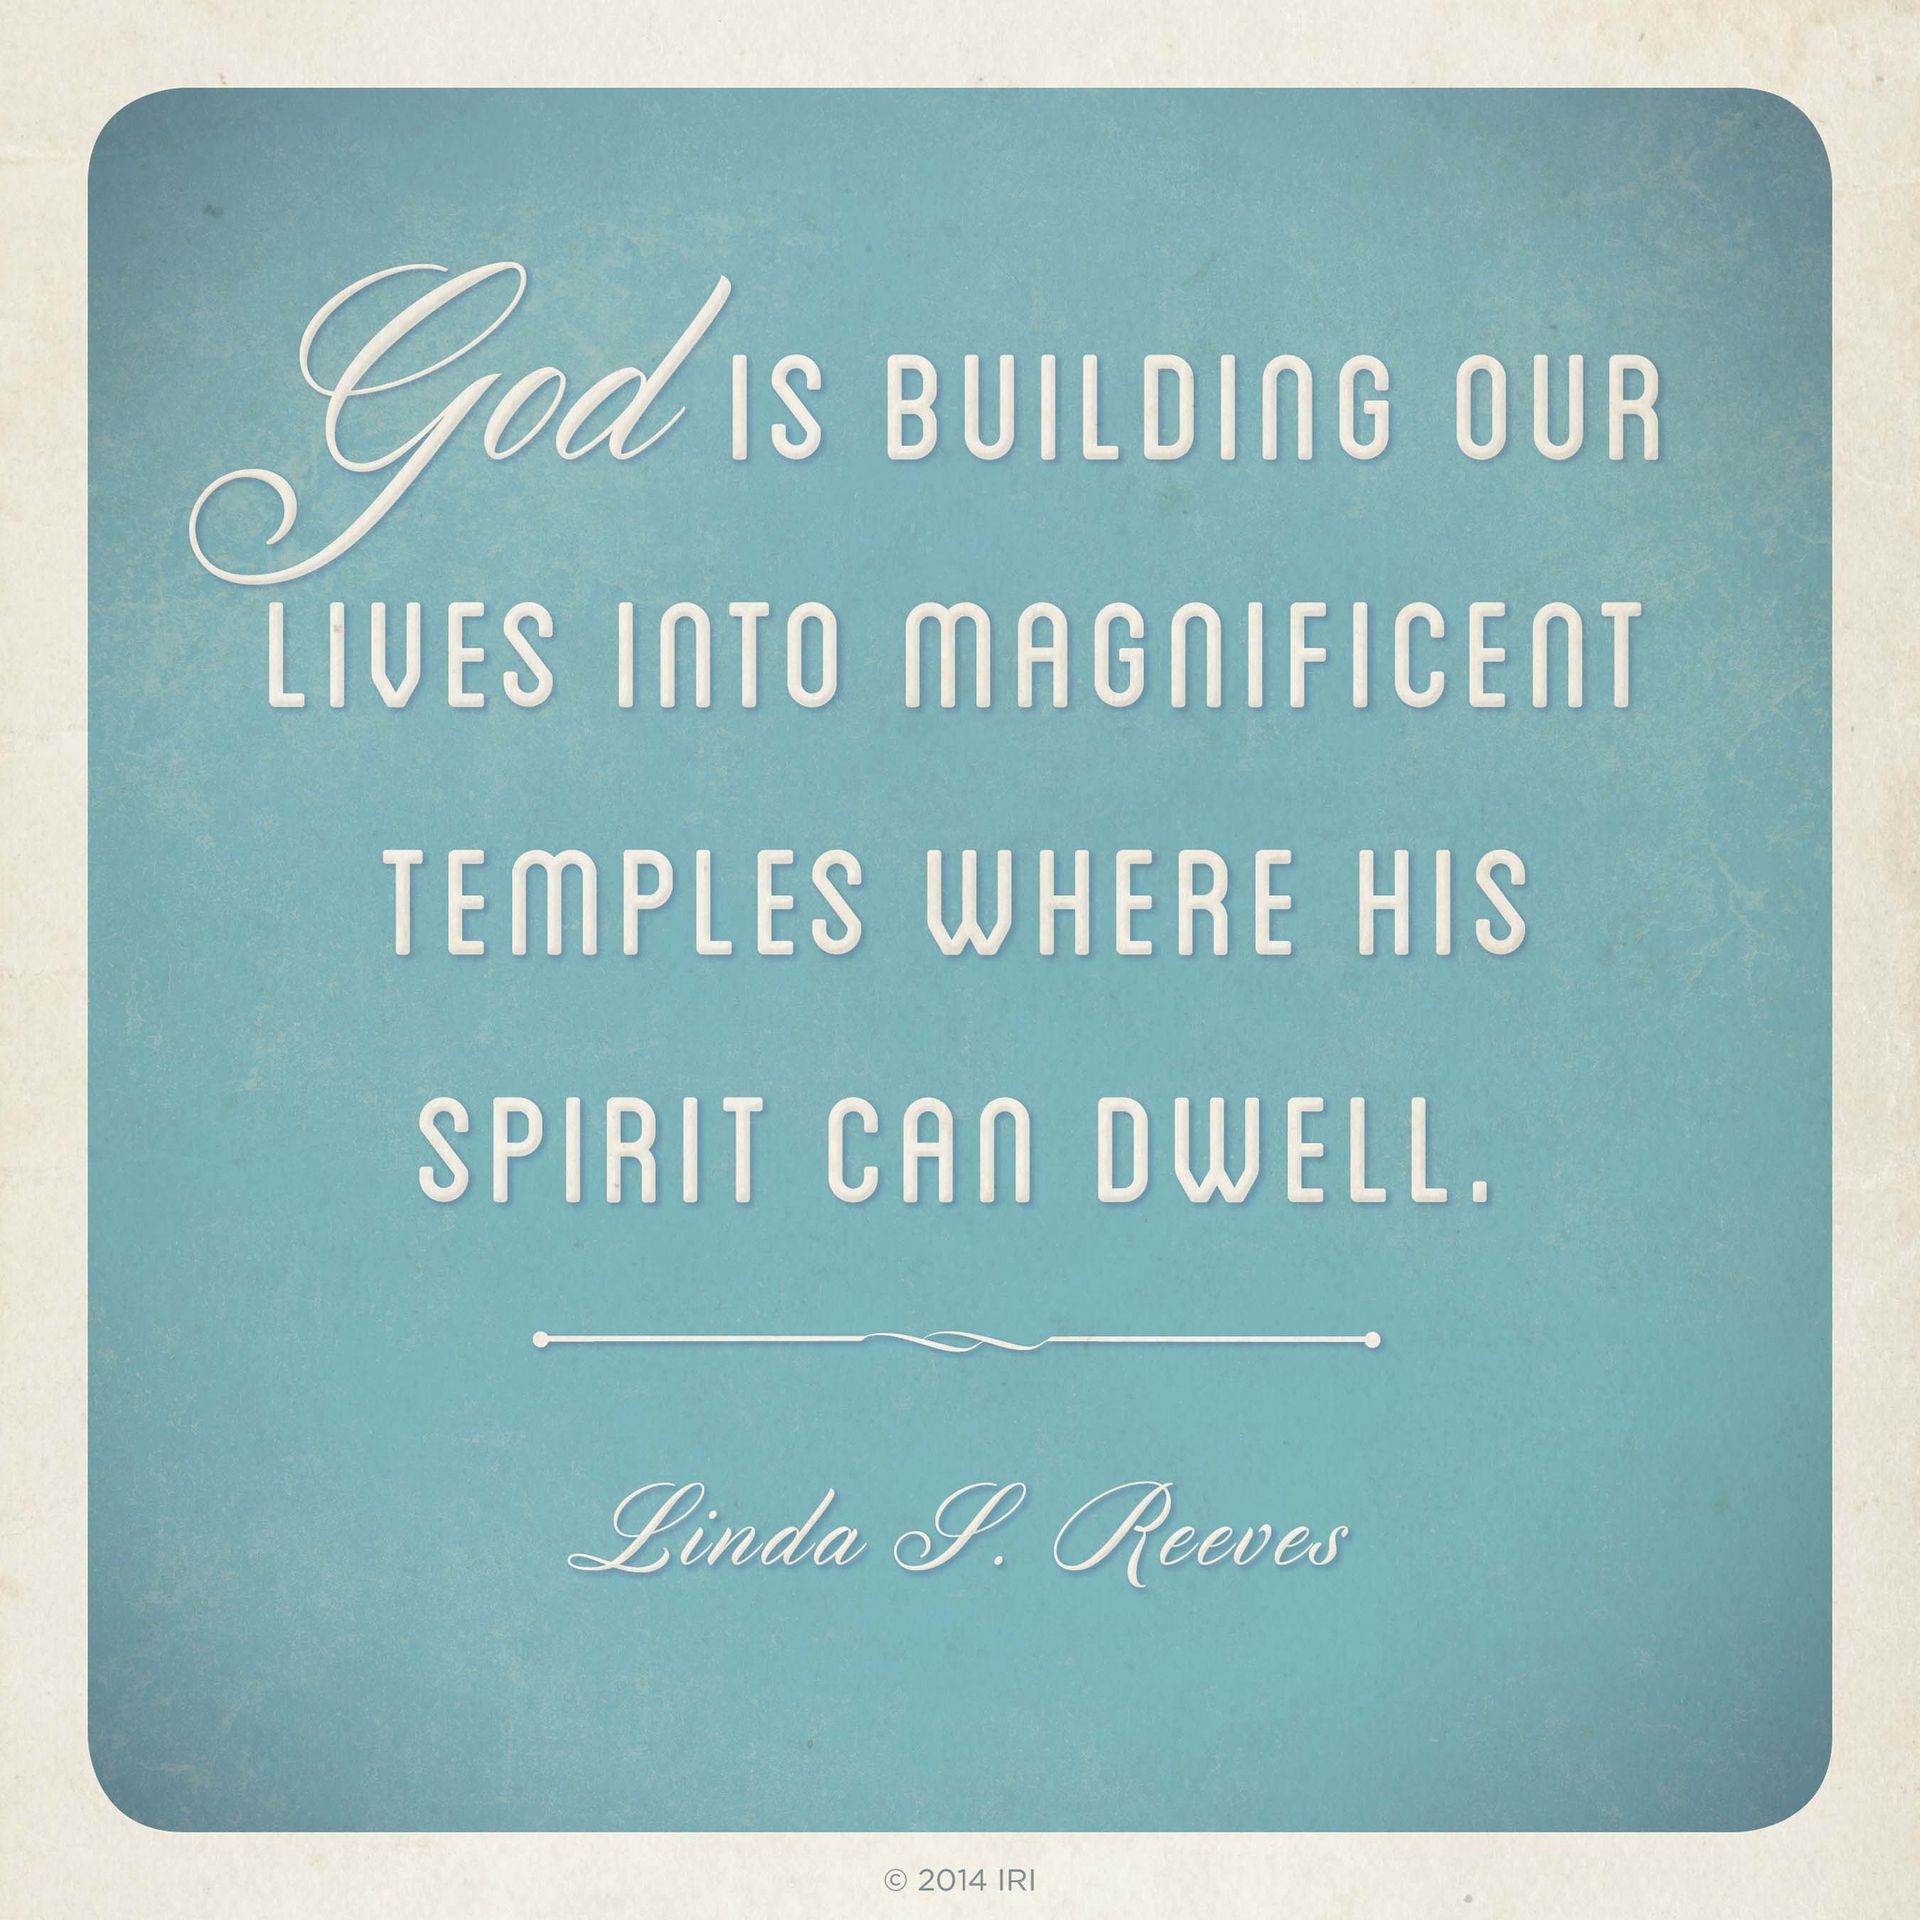 “God is building our lives into magnificent temples where His Spirit can dwell.”—Sister Linda S. Reeves, “Claim the Blessings of Your Covenants”